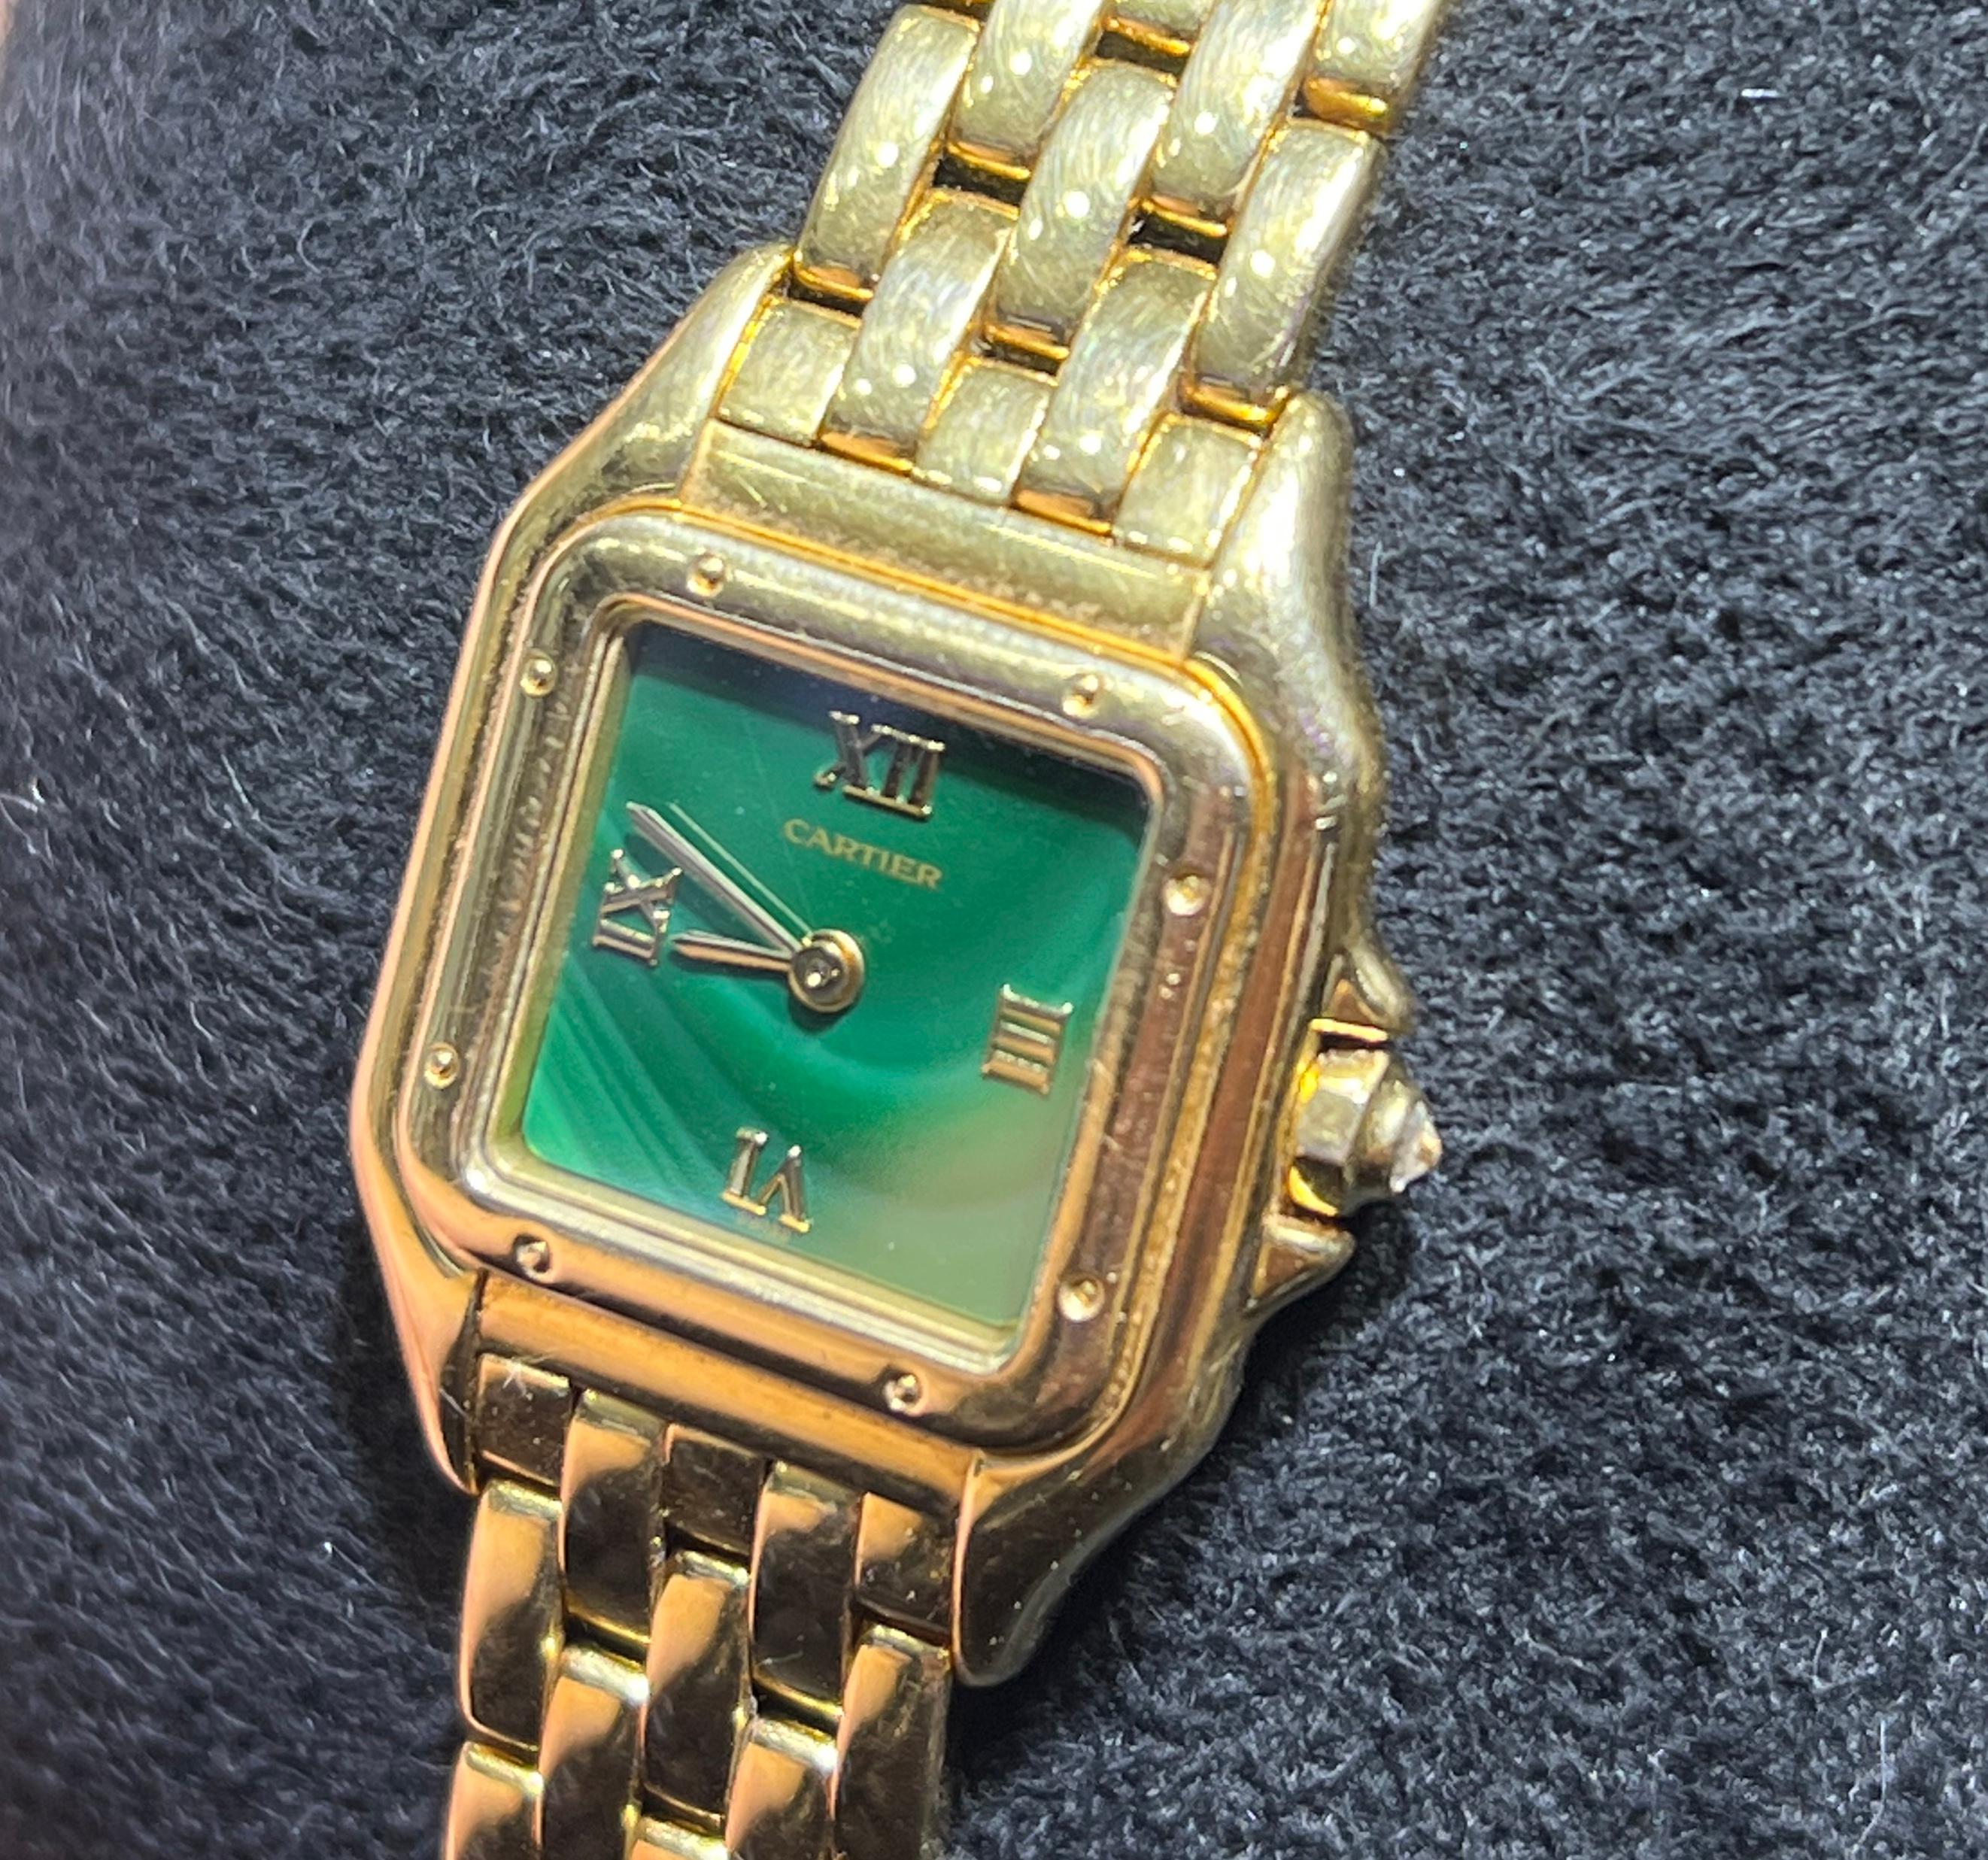 Beautiful watch by Cartier. The model is known as the Panthère and is crafted in solid 18k yellow gold. The watch is model number 1280 2. The rarity of the timepiece is in the dial. The dial is a Malachite gemstone dial with gold roman numerals. The